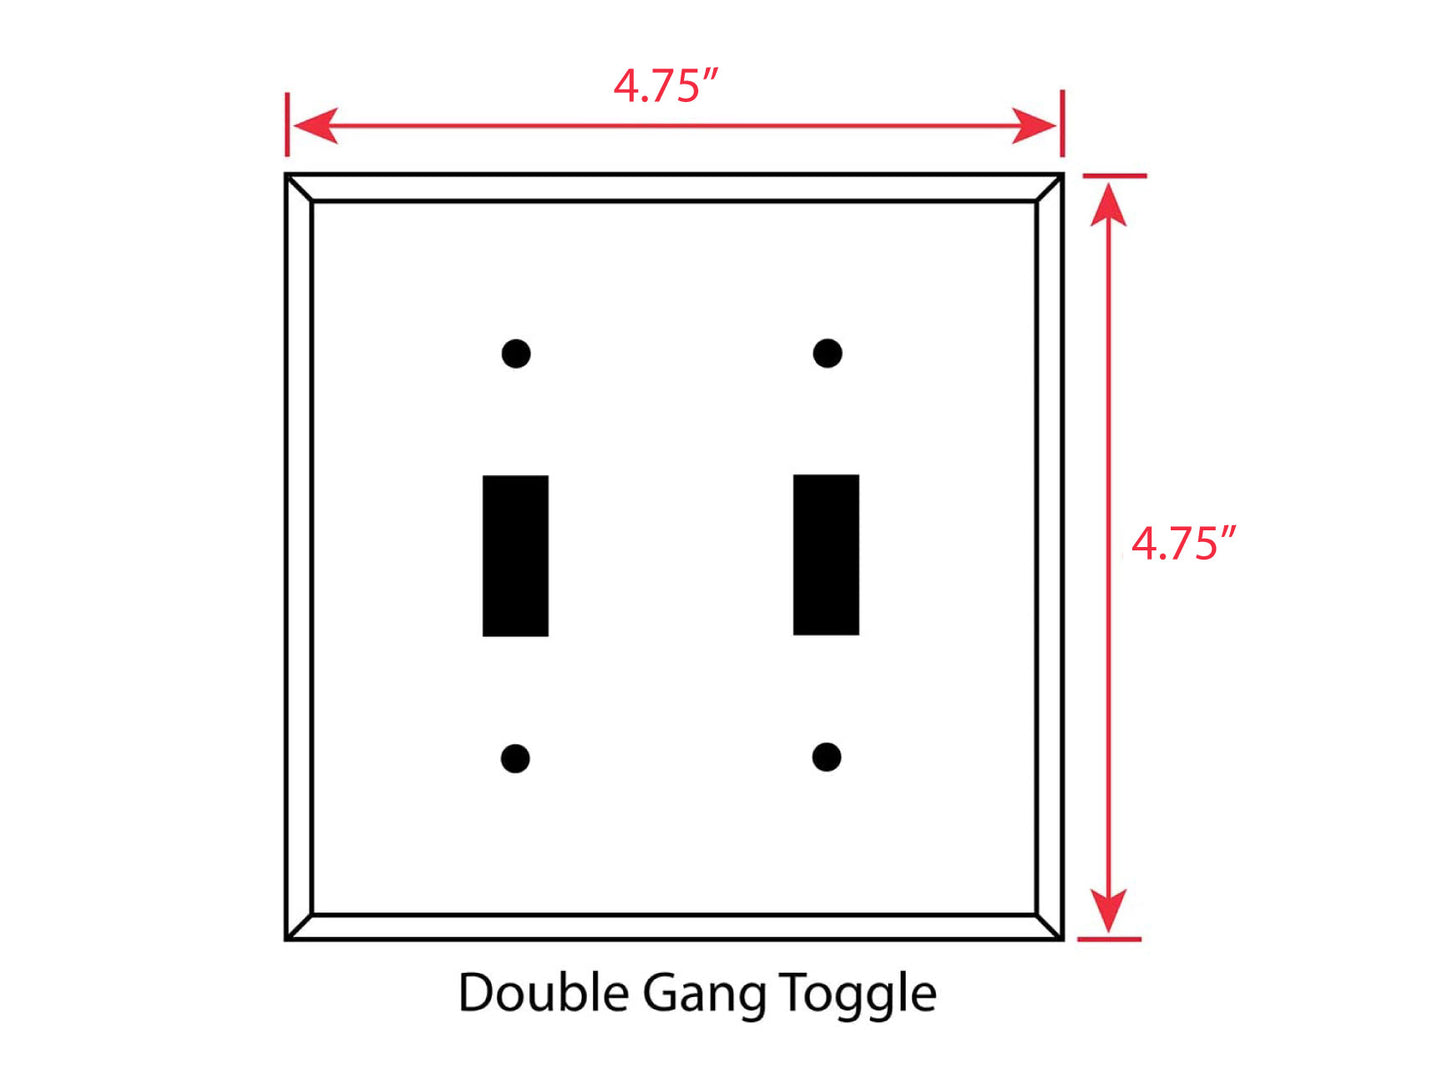 Wavy Lines, Plastic Double Gang Toggle Light Switch Wall Plate, Blue Teal Aqua, 4.75 x 4.75 inches